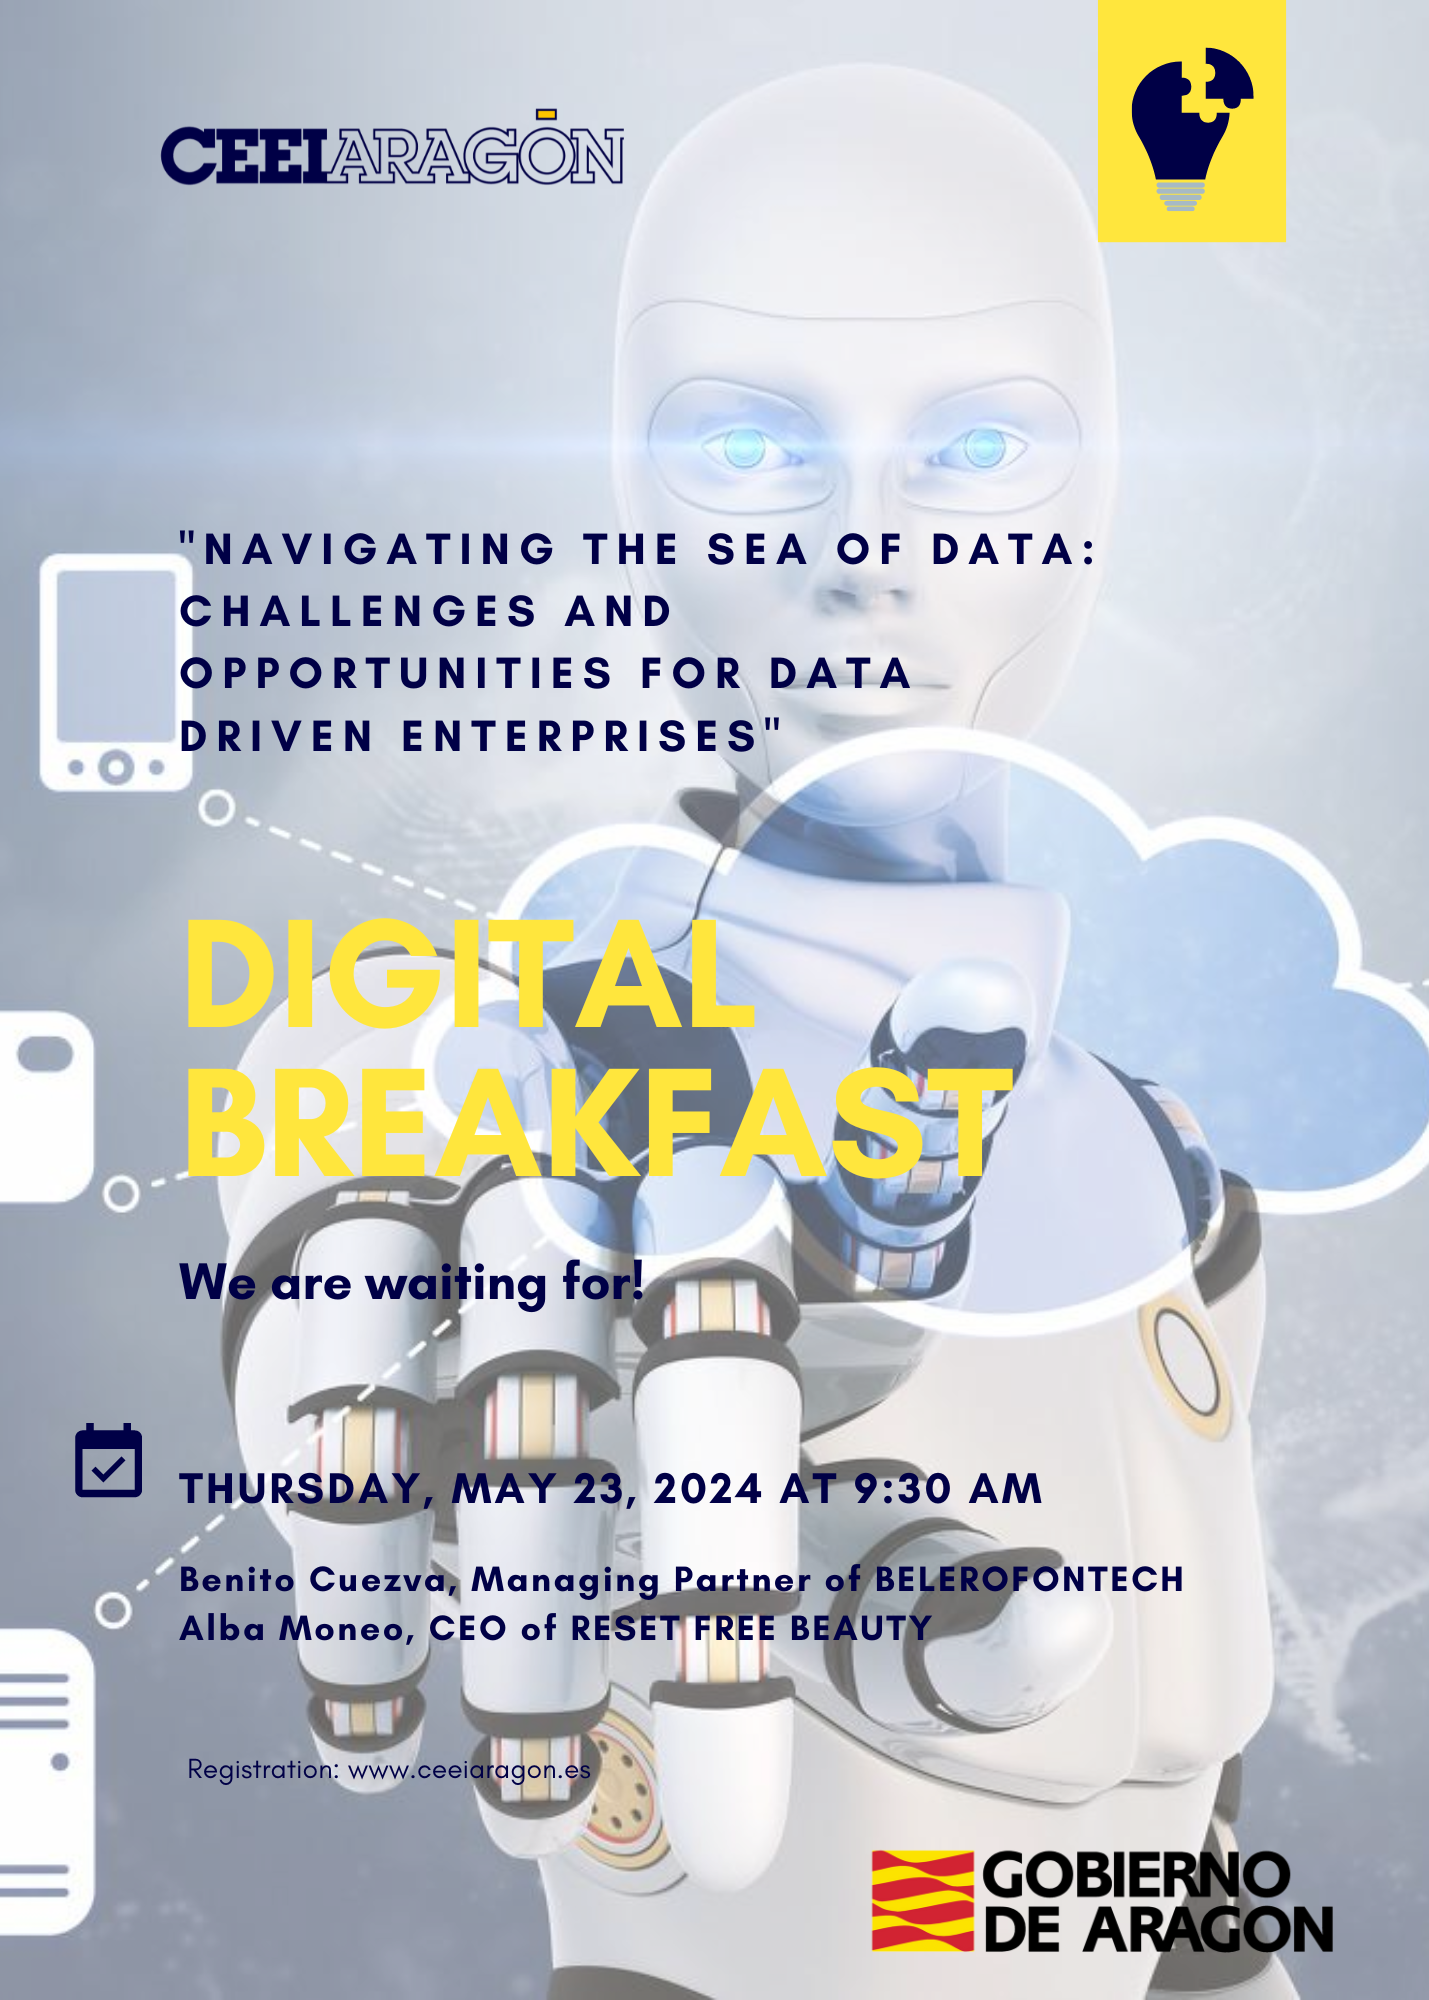 CEEI Digital Breakfast “Navigating in the sea of data: challenges and opportunities for data driven companies”